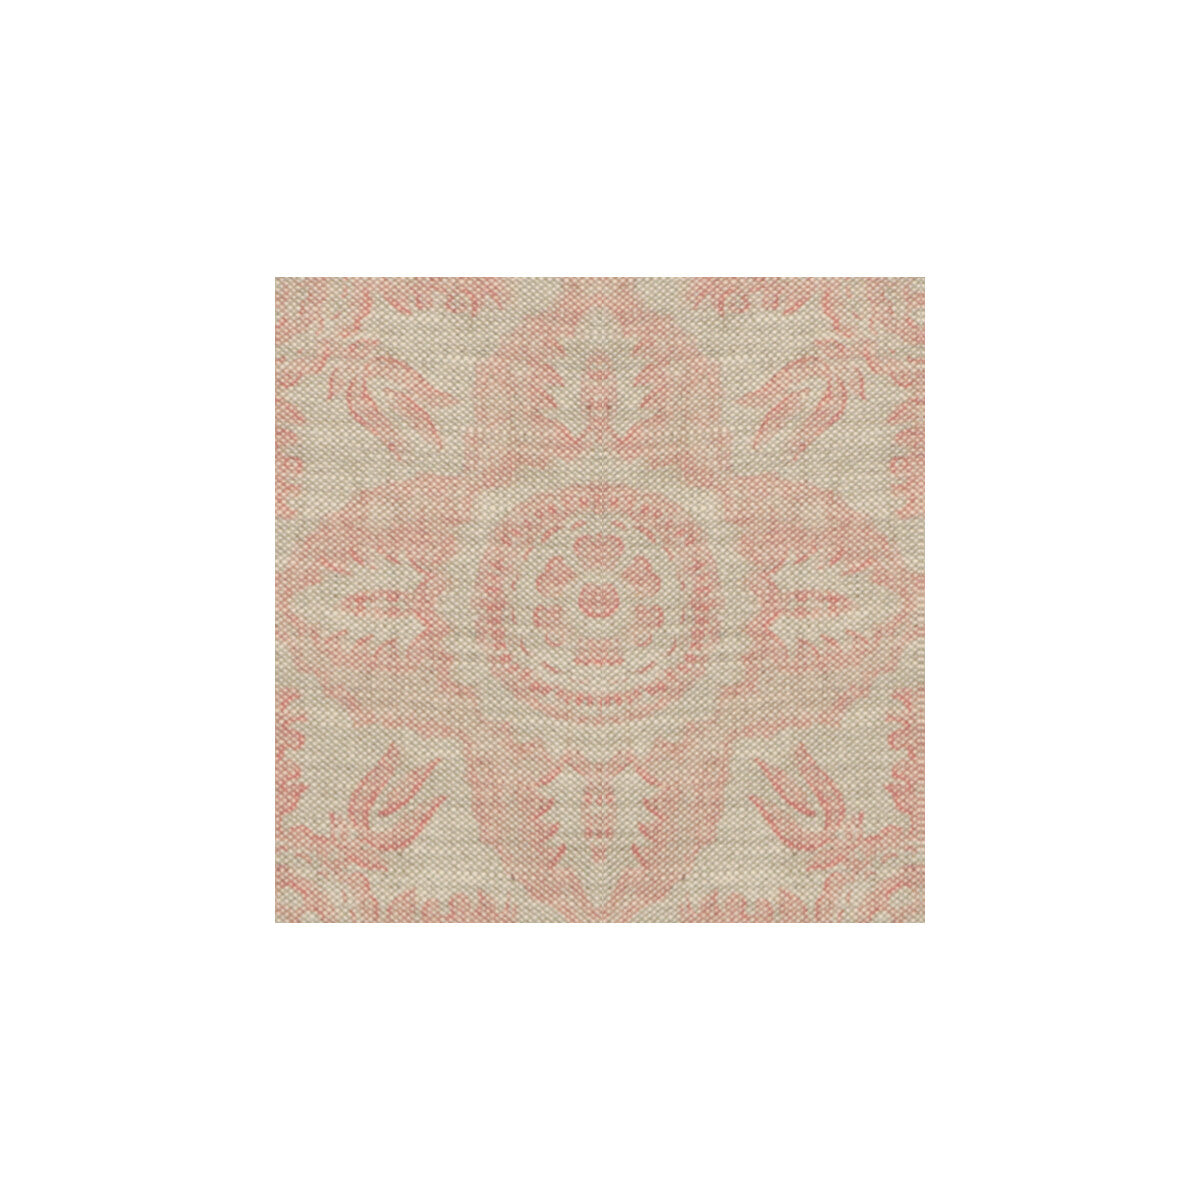 Rossmore fabric in pink color - pattern BFC-3517.17.0 - by Lee Jofa in the Blithfield collection